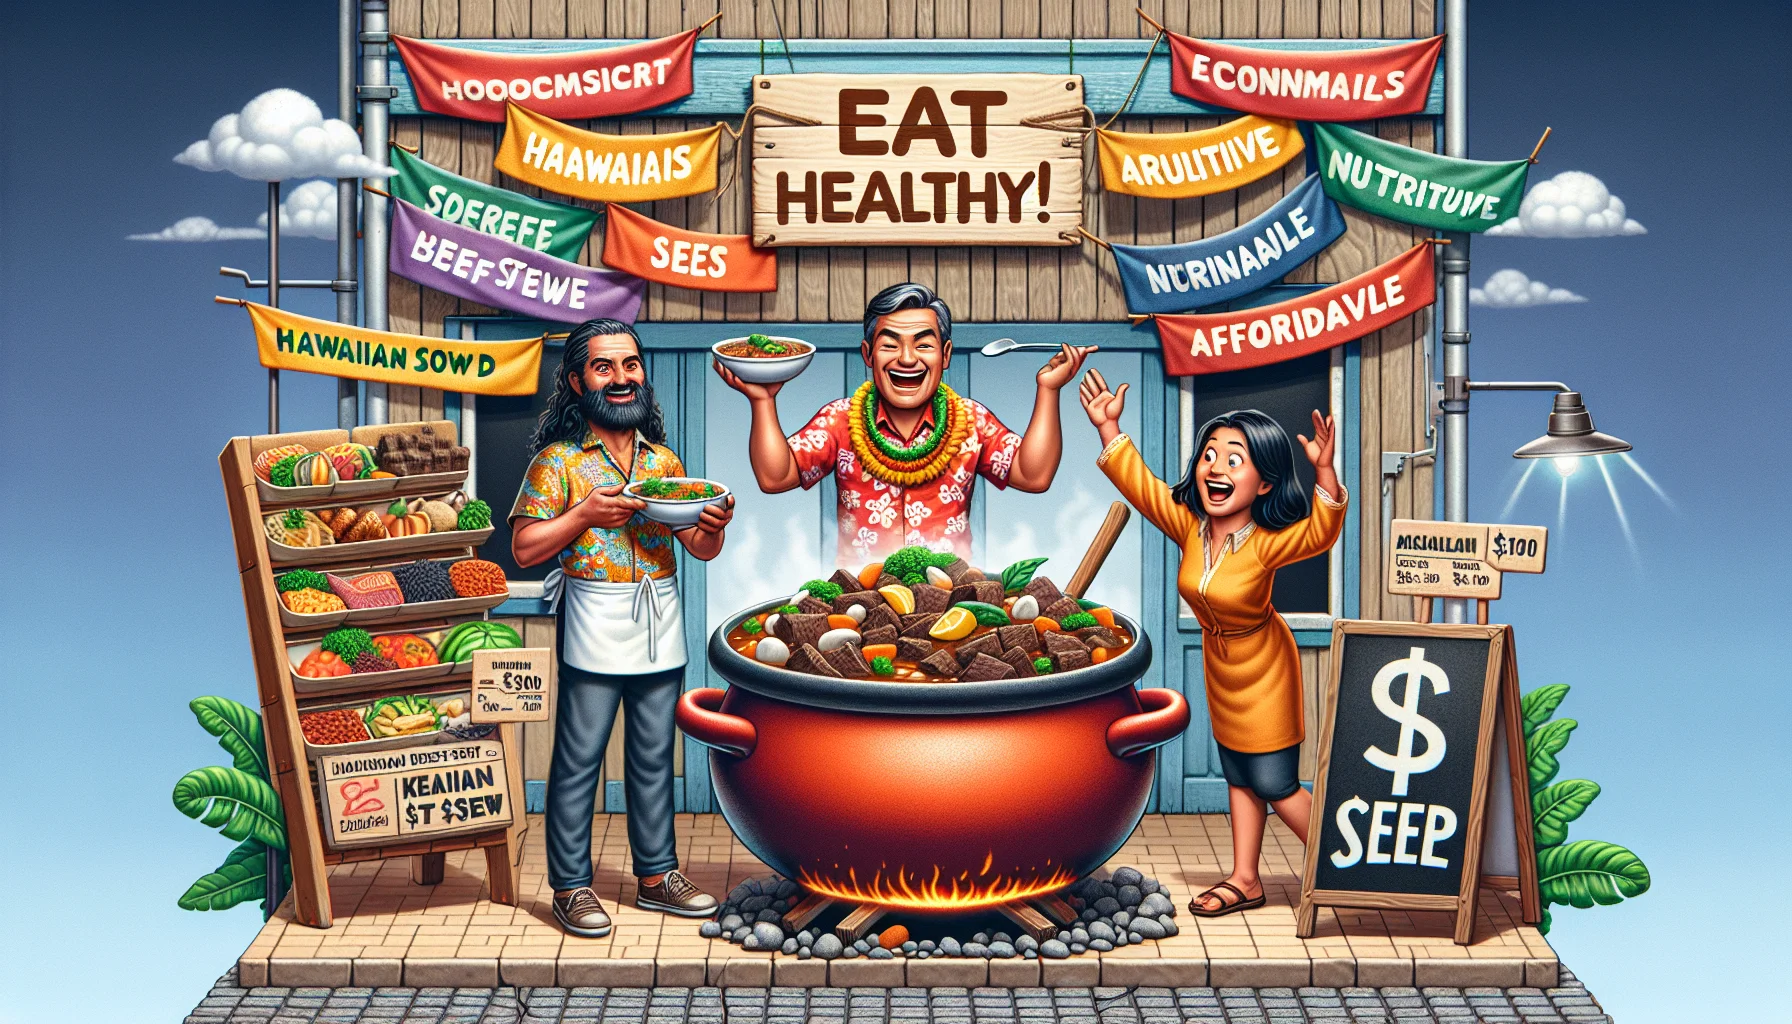 Create a humorous scene showcasing a healthy and affordable Hawaiian beef stew recipe. Let's imagine a quirky street market with colorful banners advocating for economical, nutritious food choices. A large vibrant pot filled with simmering Hawaiian beef stew is the centerpiece. The scene also includes a charismatic Asian man enthusiastically serving the stew, wearing a vibrant Hawaiian shirt, and a Middle-Eastern woman excitedly holding a bowl next to an oversized dollar sign, demonstrating the affordability. The backdrop features a rustic chalkboard detailing the health benefits of the ingredients. This captivating image will entice people to eat healthy for less money.